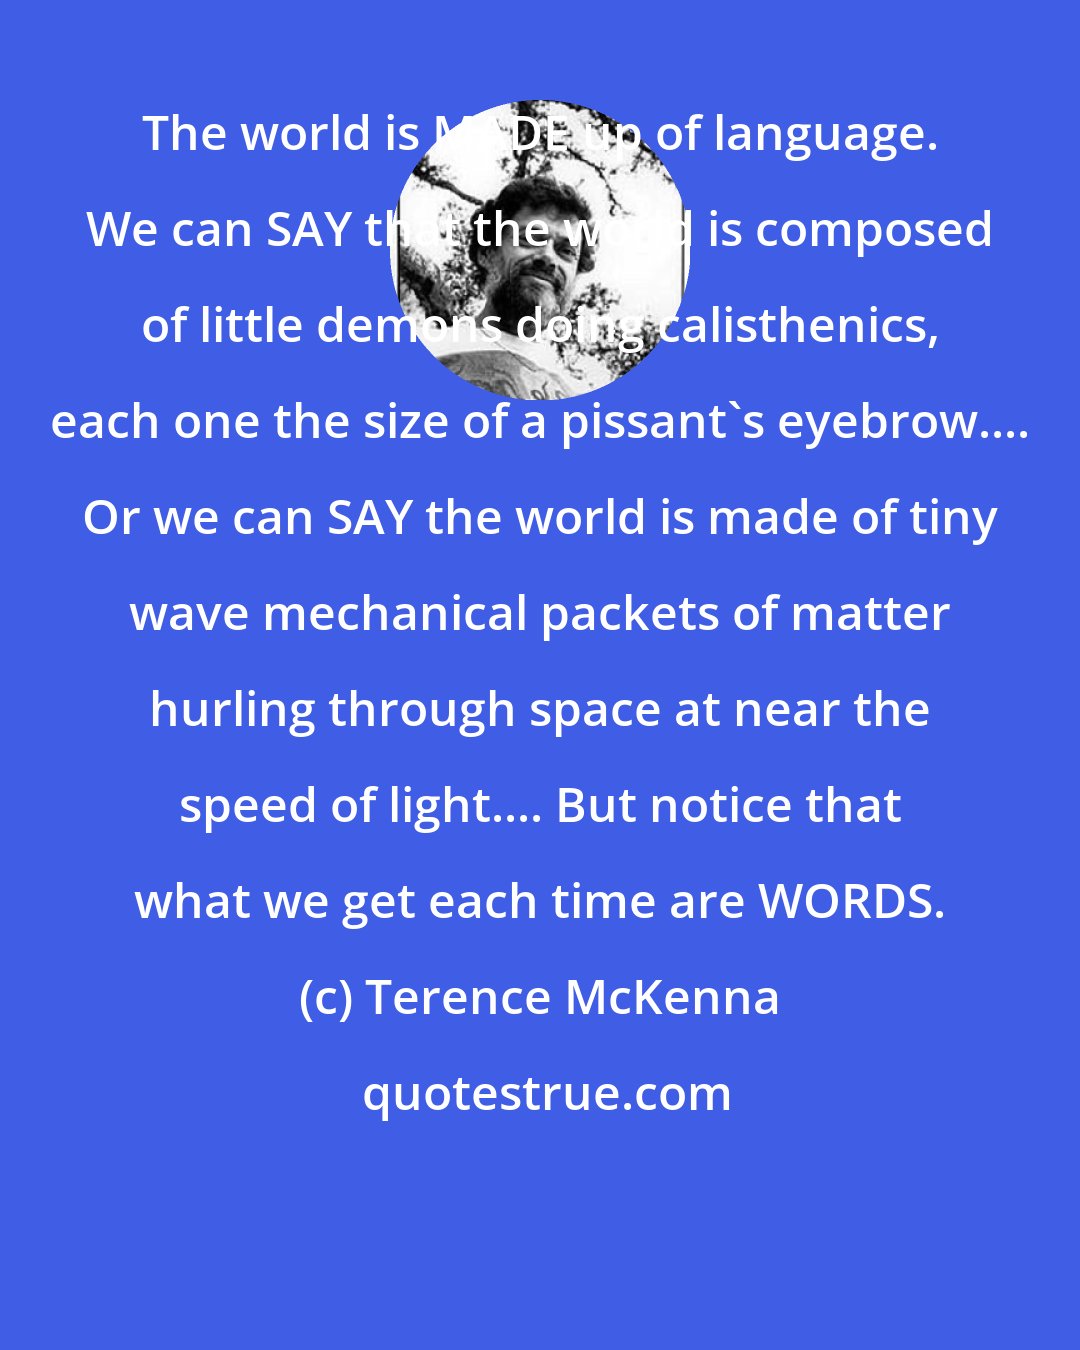 Terence McKenna: The world is MADE up of language. We can SAY that the world is composed of little demons doing calisthenics, each one the size of a pissant's eyebrow.... Or we can SAY the world is made of tiny wave mechanical packets of matter hurling through space at near the speed of light.... But notice that what we get each time are WORDS.